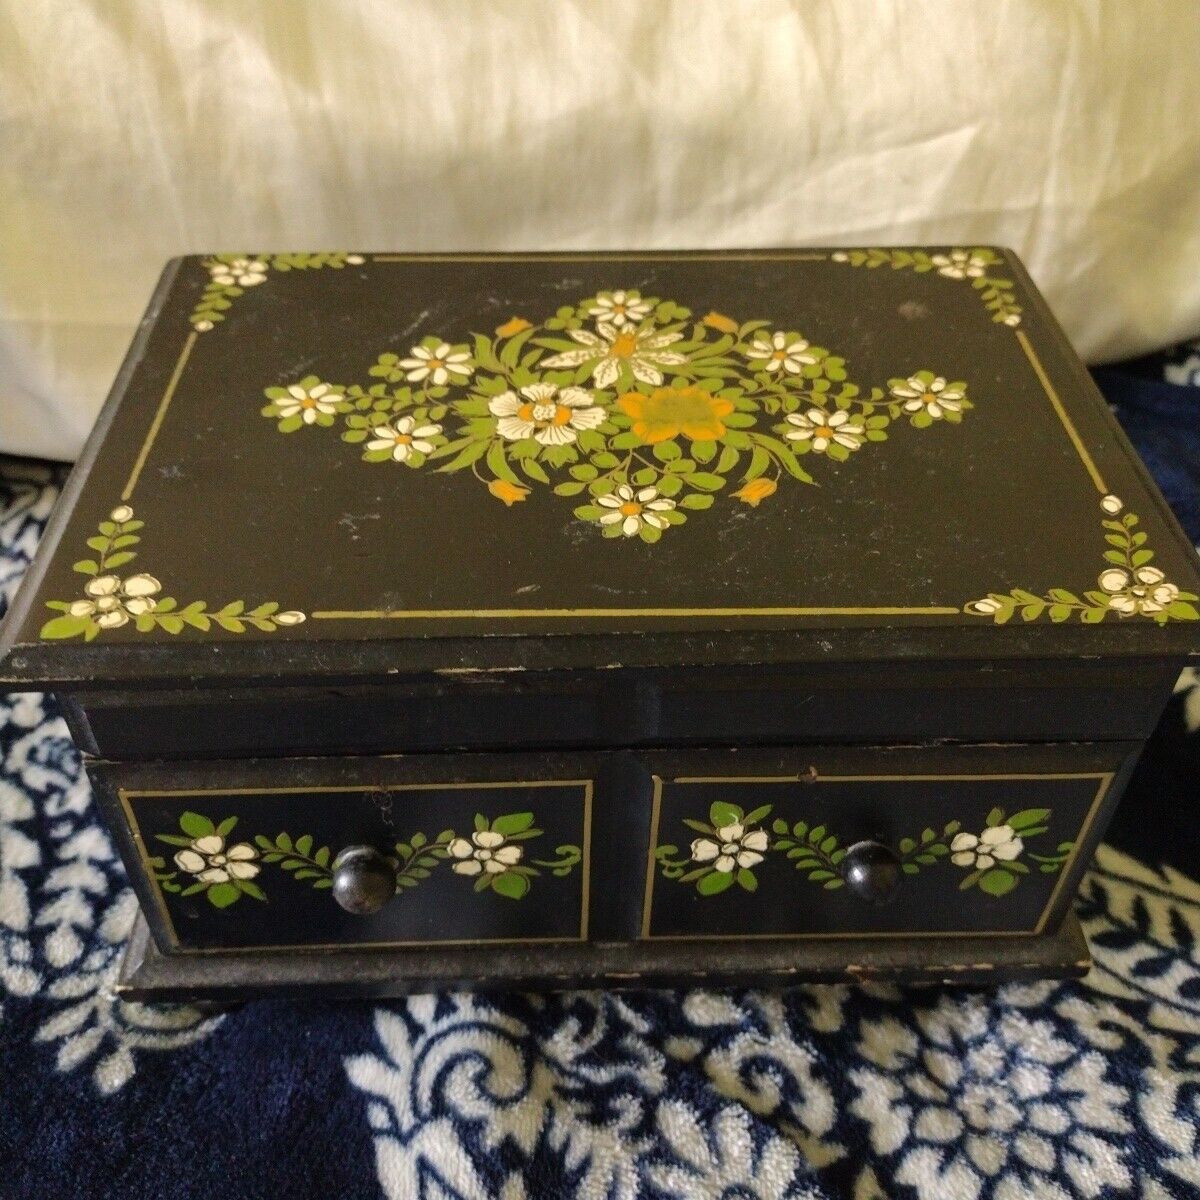 Black With Flowering Design Vintage Jewelry Music Box Unsigned Works.